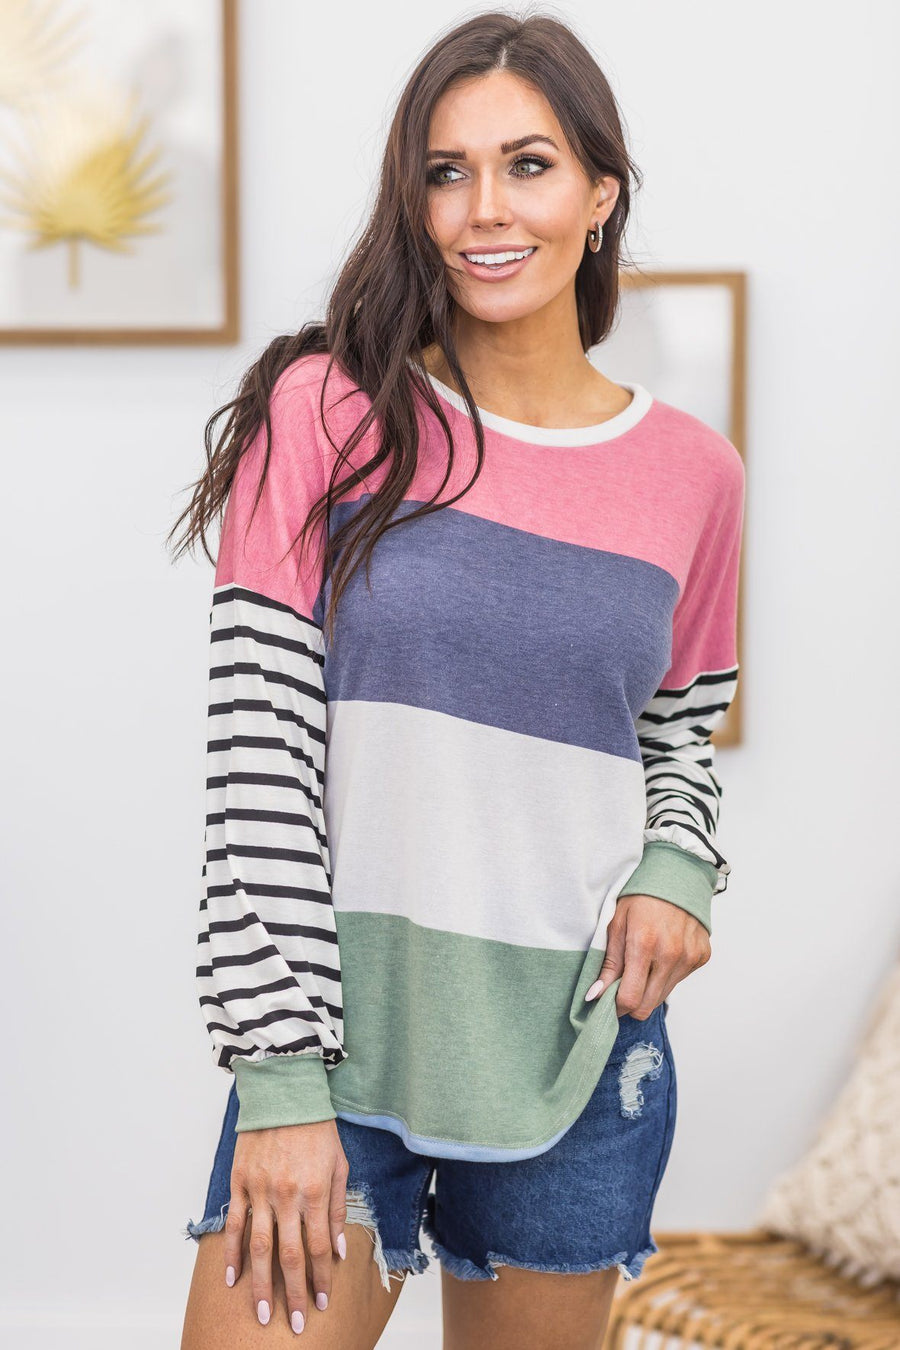 Trendy Tops Online | Shop for cute long sleeve tops at Filly Flair!